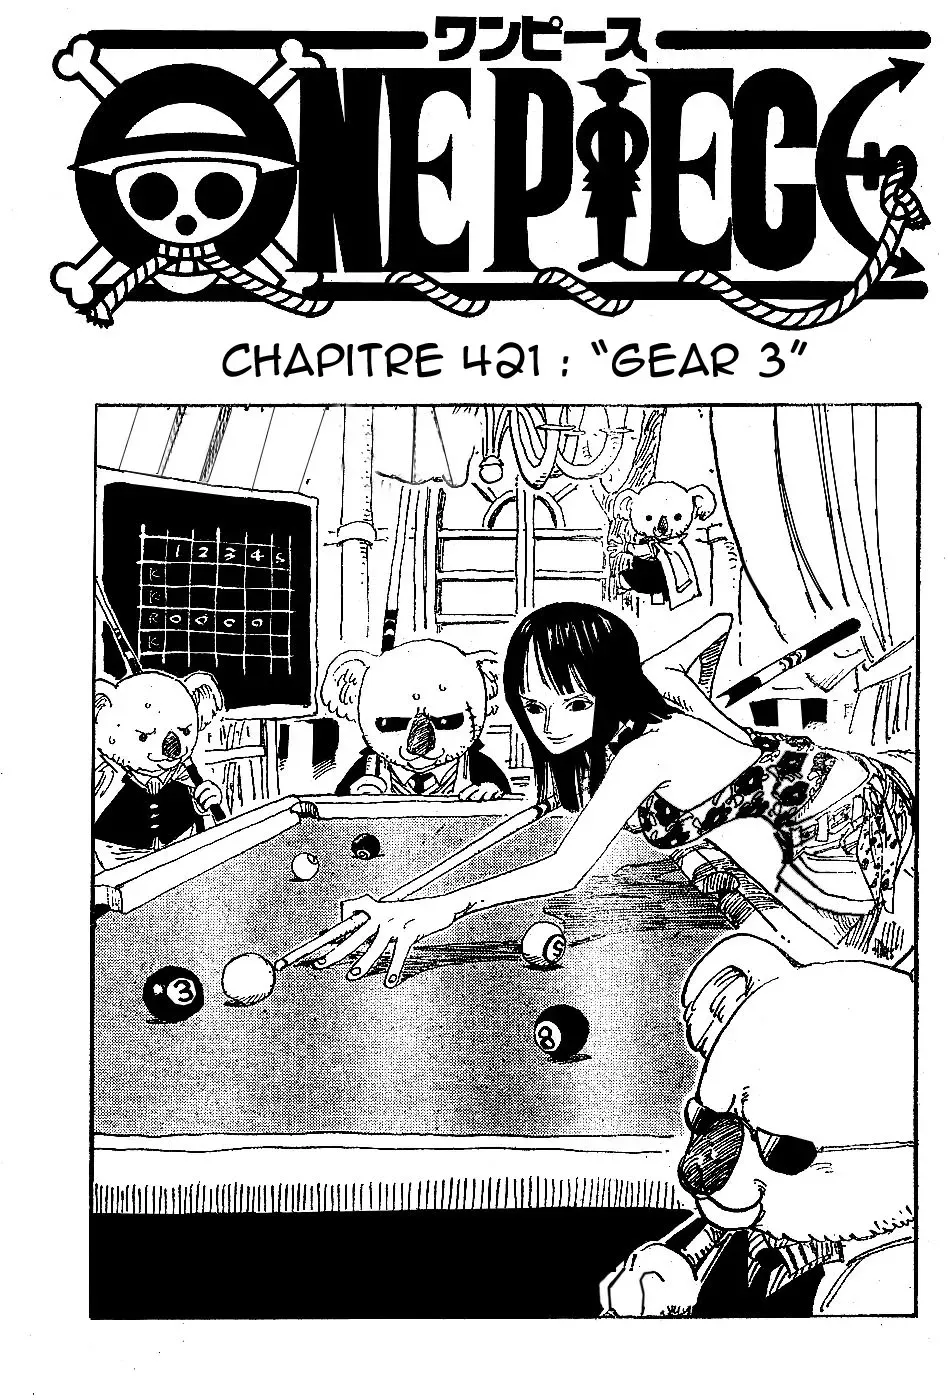 One Piece: Chapter chapitre-421 - Page 1